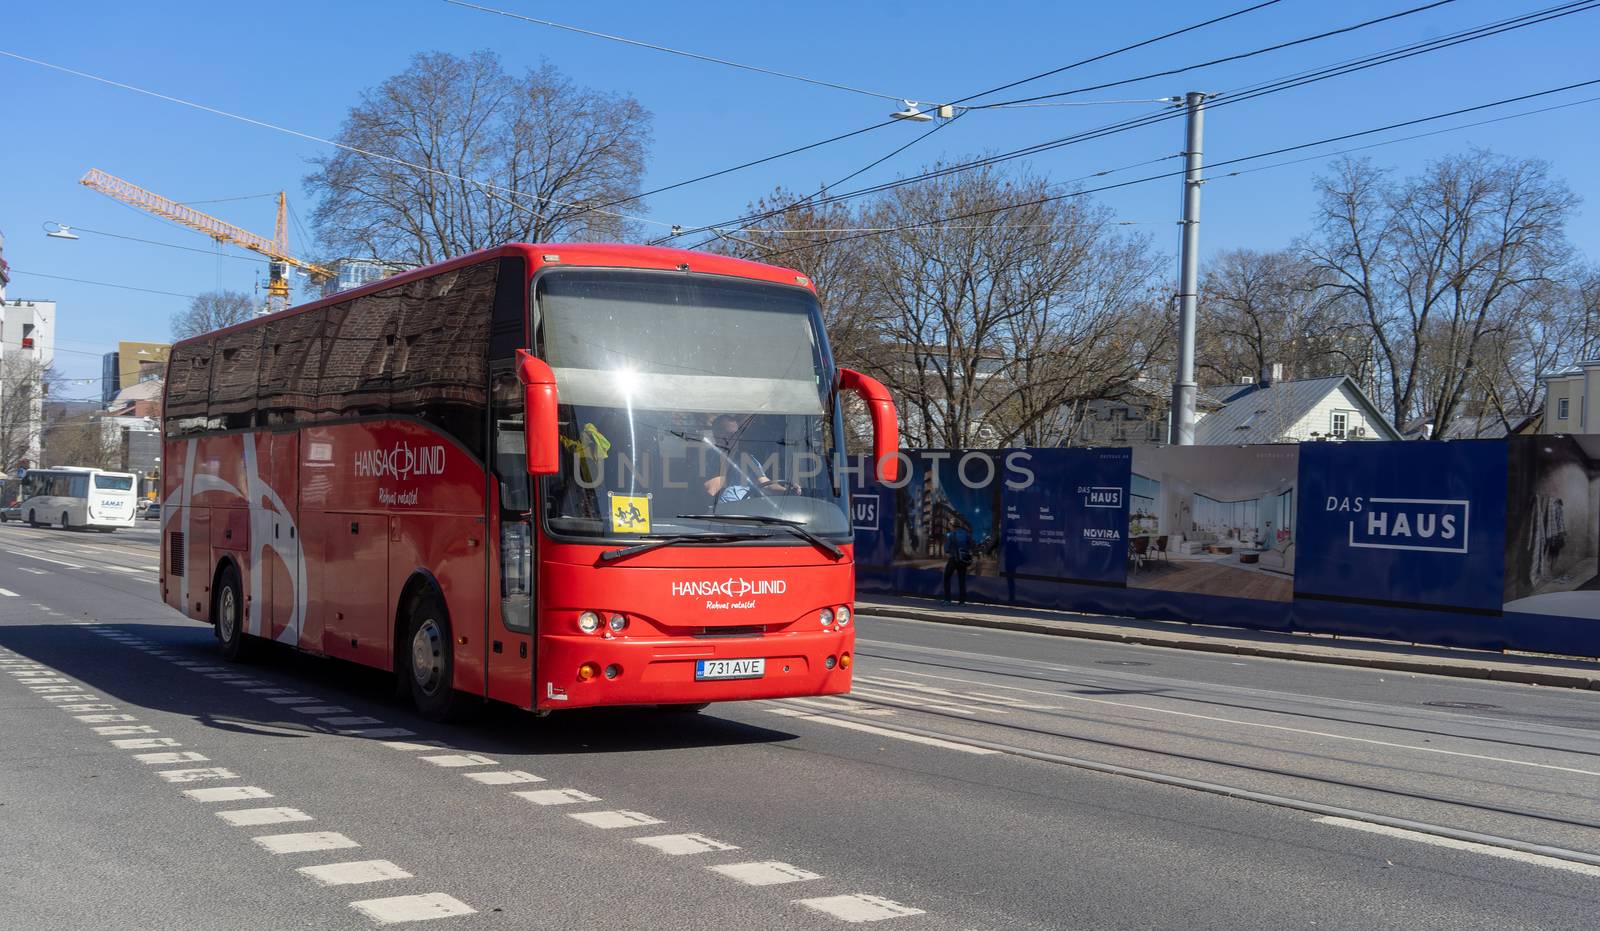 April 20, 2018, Tallinn, Estonia. A red bus with an information sign caution children on a windshield on a street in Tallinn.